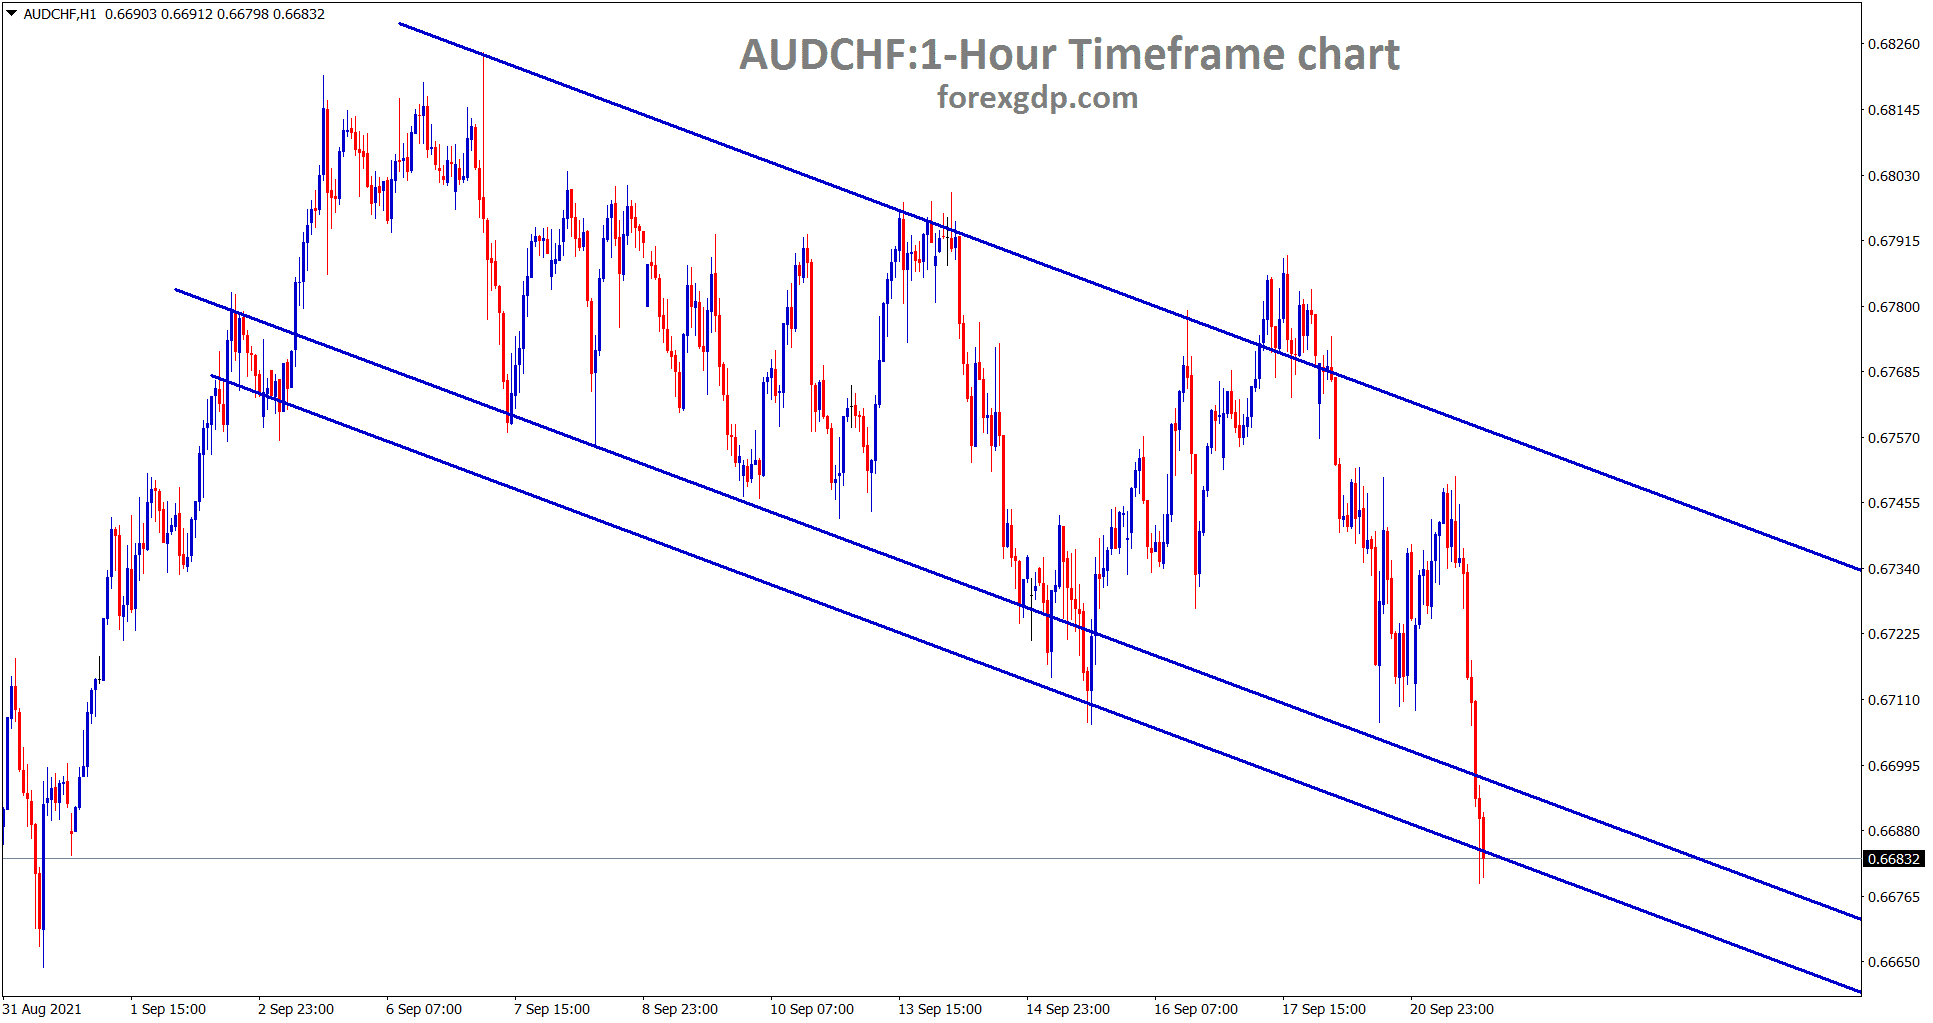 AUDCHF is moving in a clear descending channel